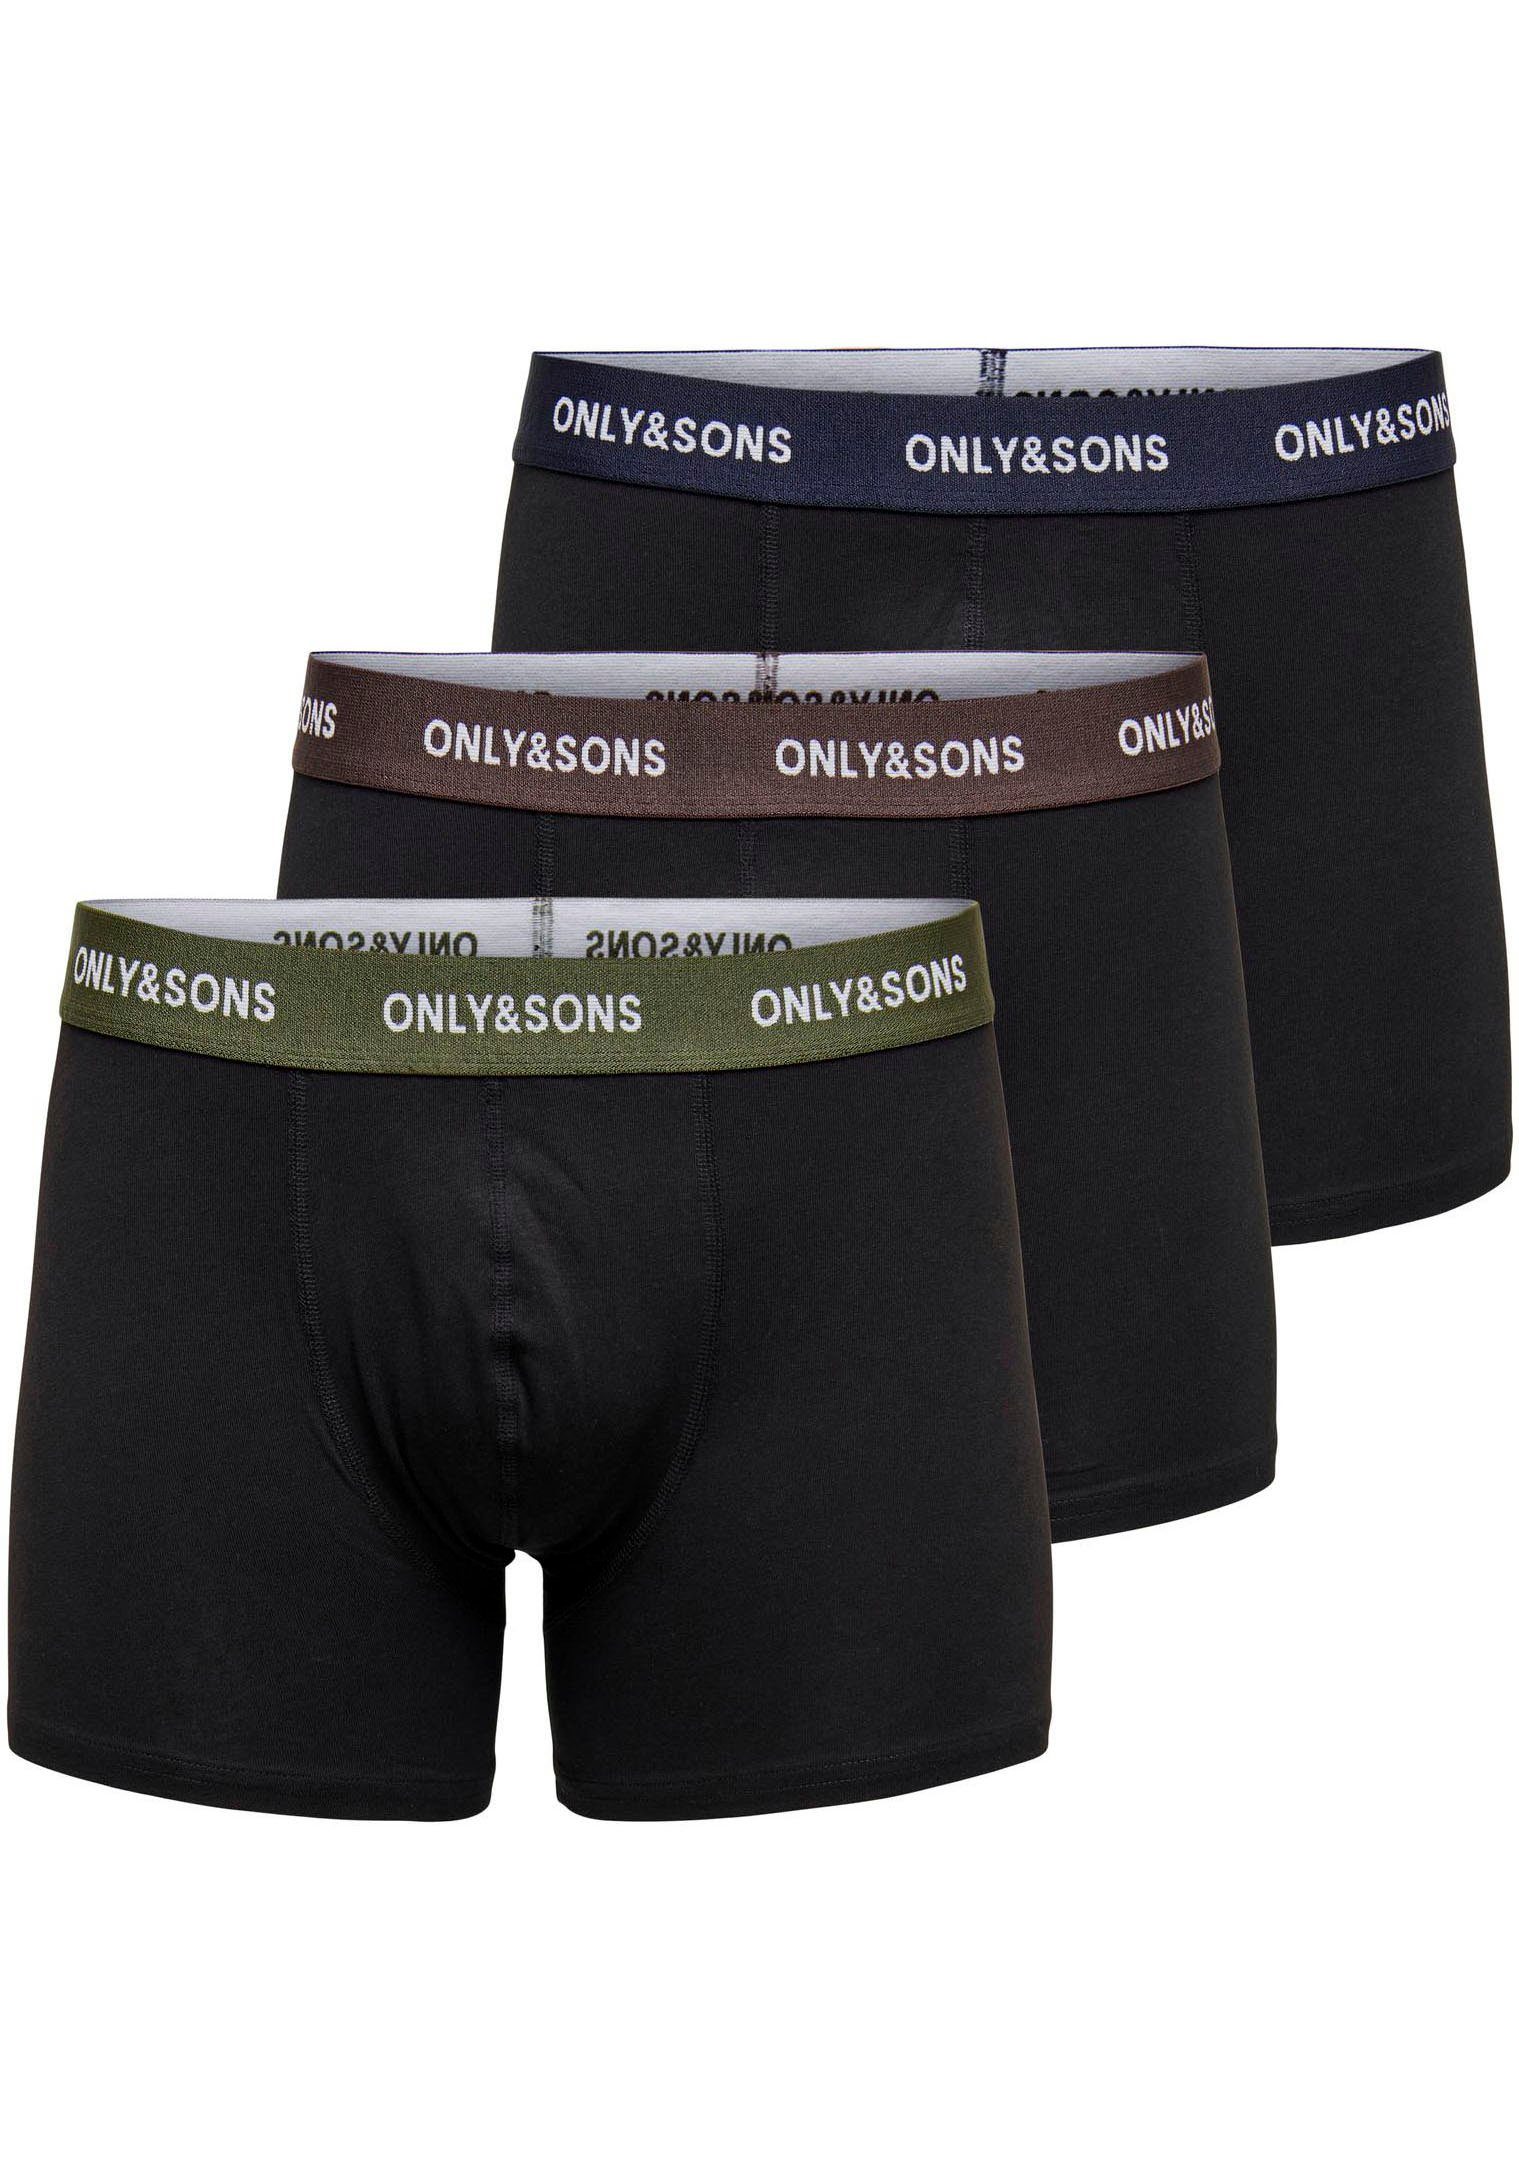 & TRUNK DEEP ONSFITZ WAISTBAND BLACK SONS Trunk (Packung, 3PACK3854 LG SOLID ONLY NOOS Black 3-St)